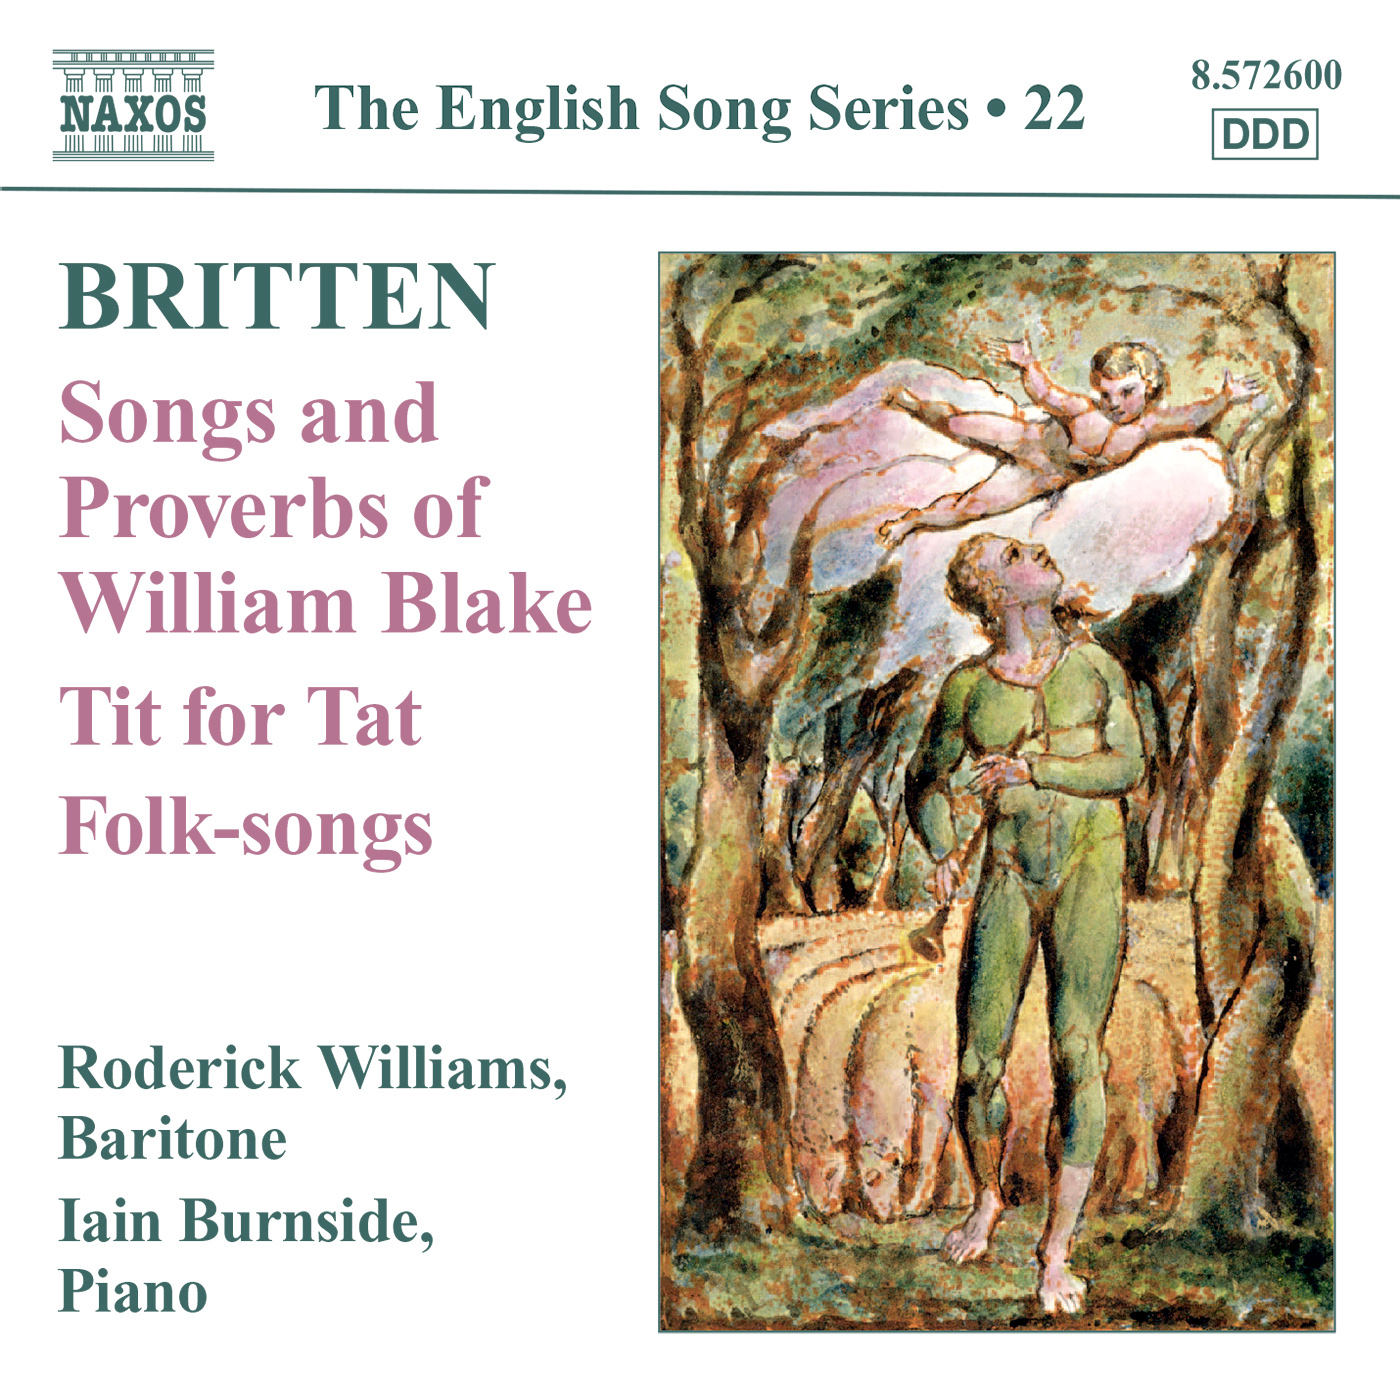 BRITTEN, B.: Songs and Proverbs of William Blake / Tit for Tat / Folk Song Arrangements (English Song, Vol. 22) (R. Williams, Burnside)